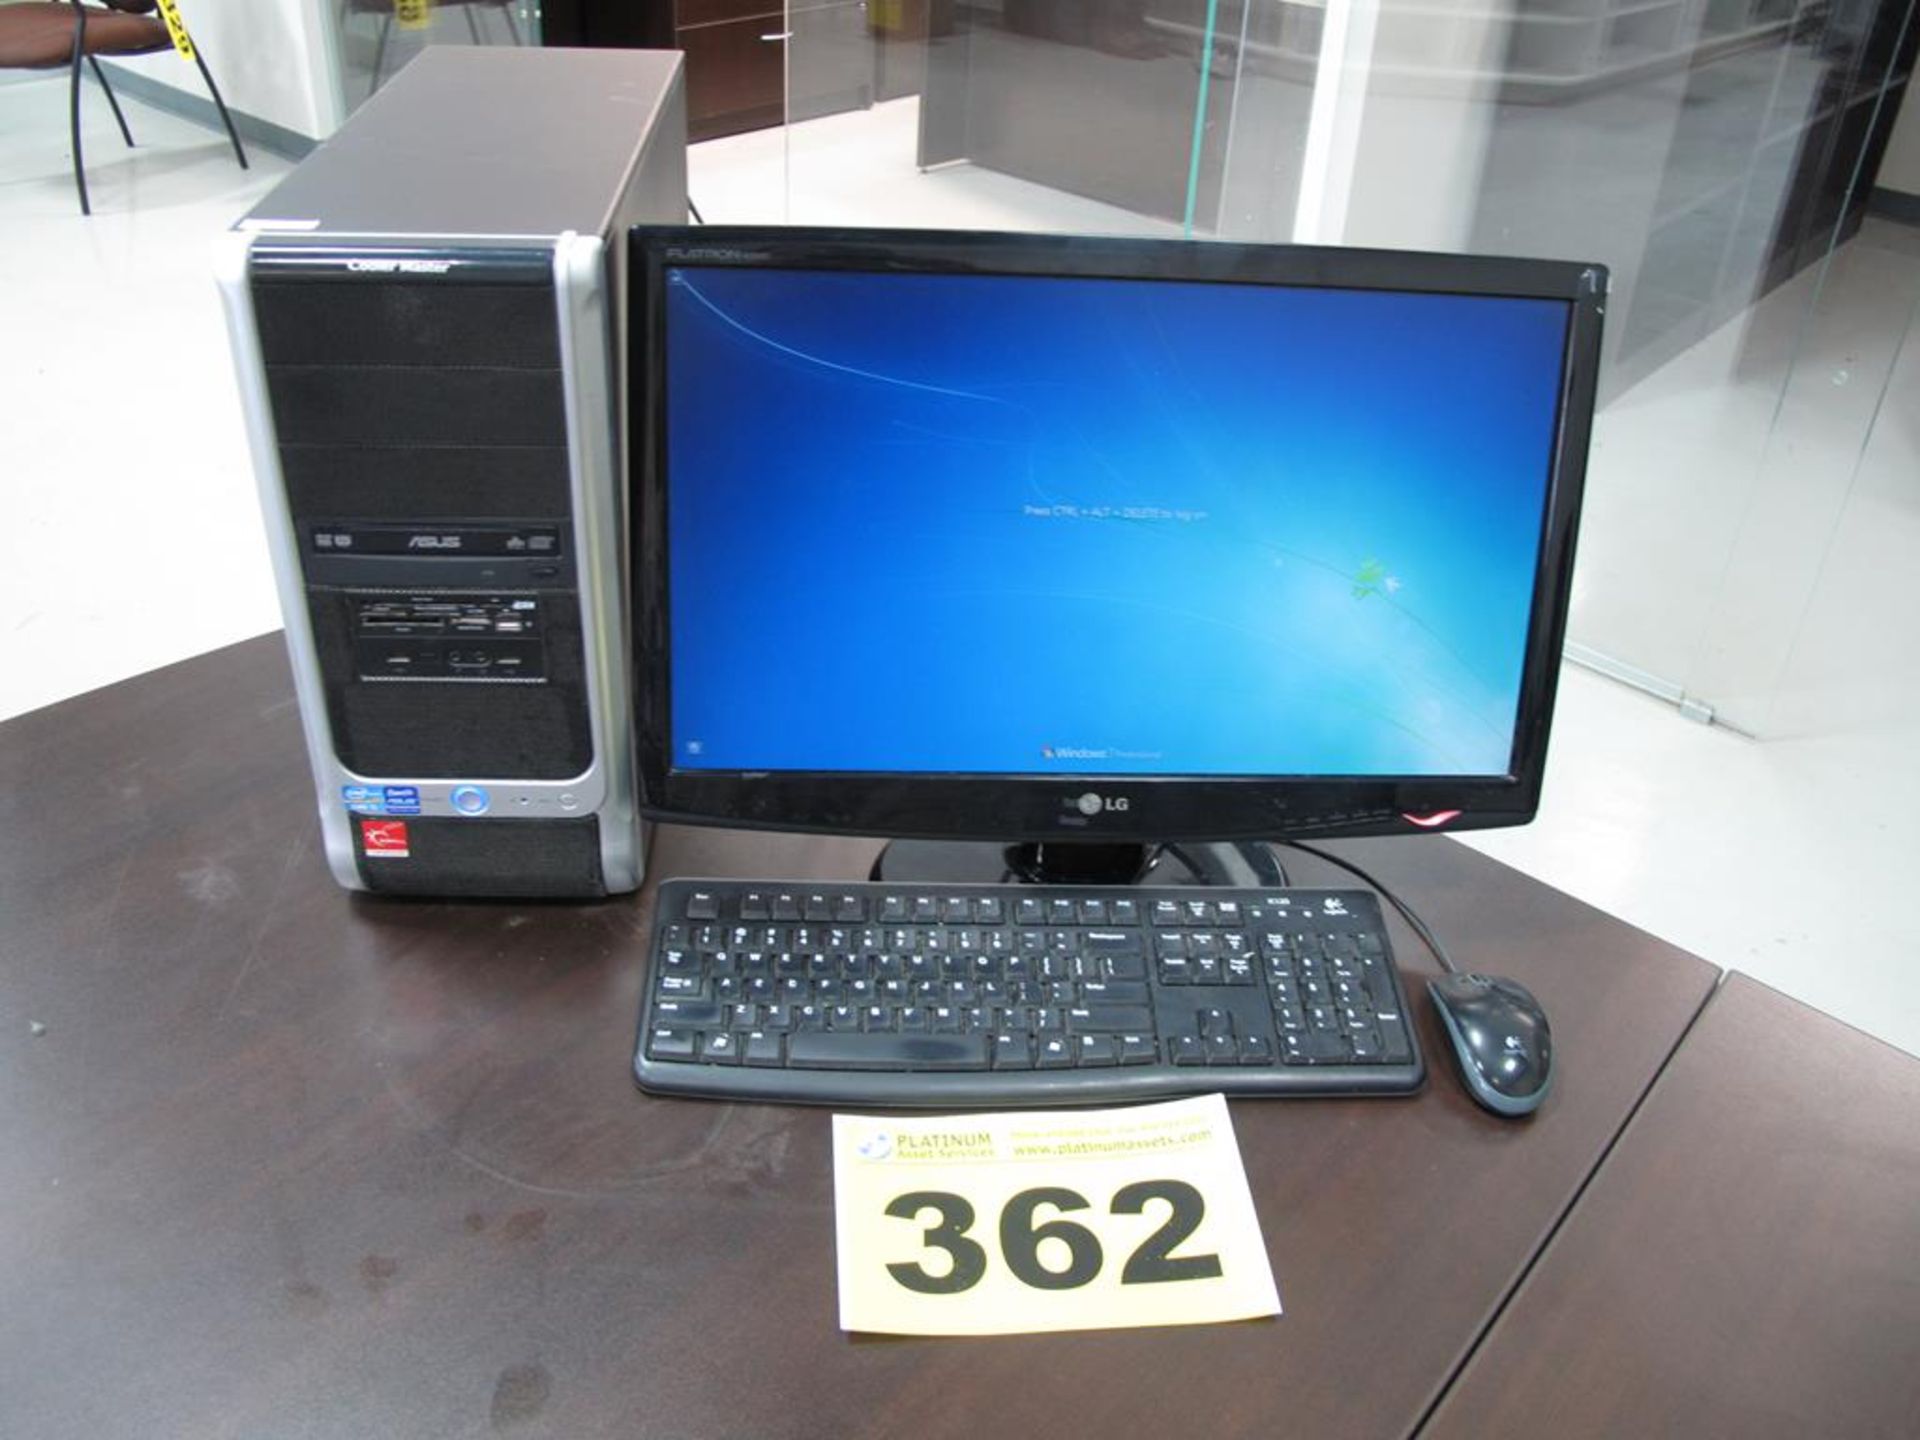 ASUS, COOLER MASTER, DESKTOP COMPUTER, WINDOWS 7 OPERATING SYSTEM WITHCOPMUTER MONITOR, KEYBOARD AND